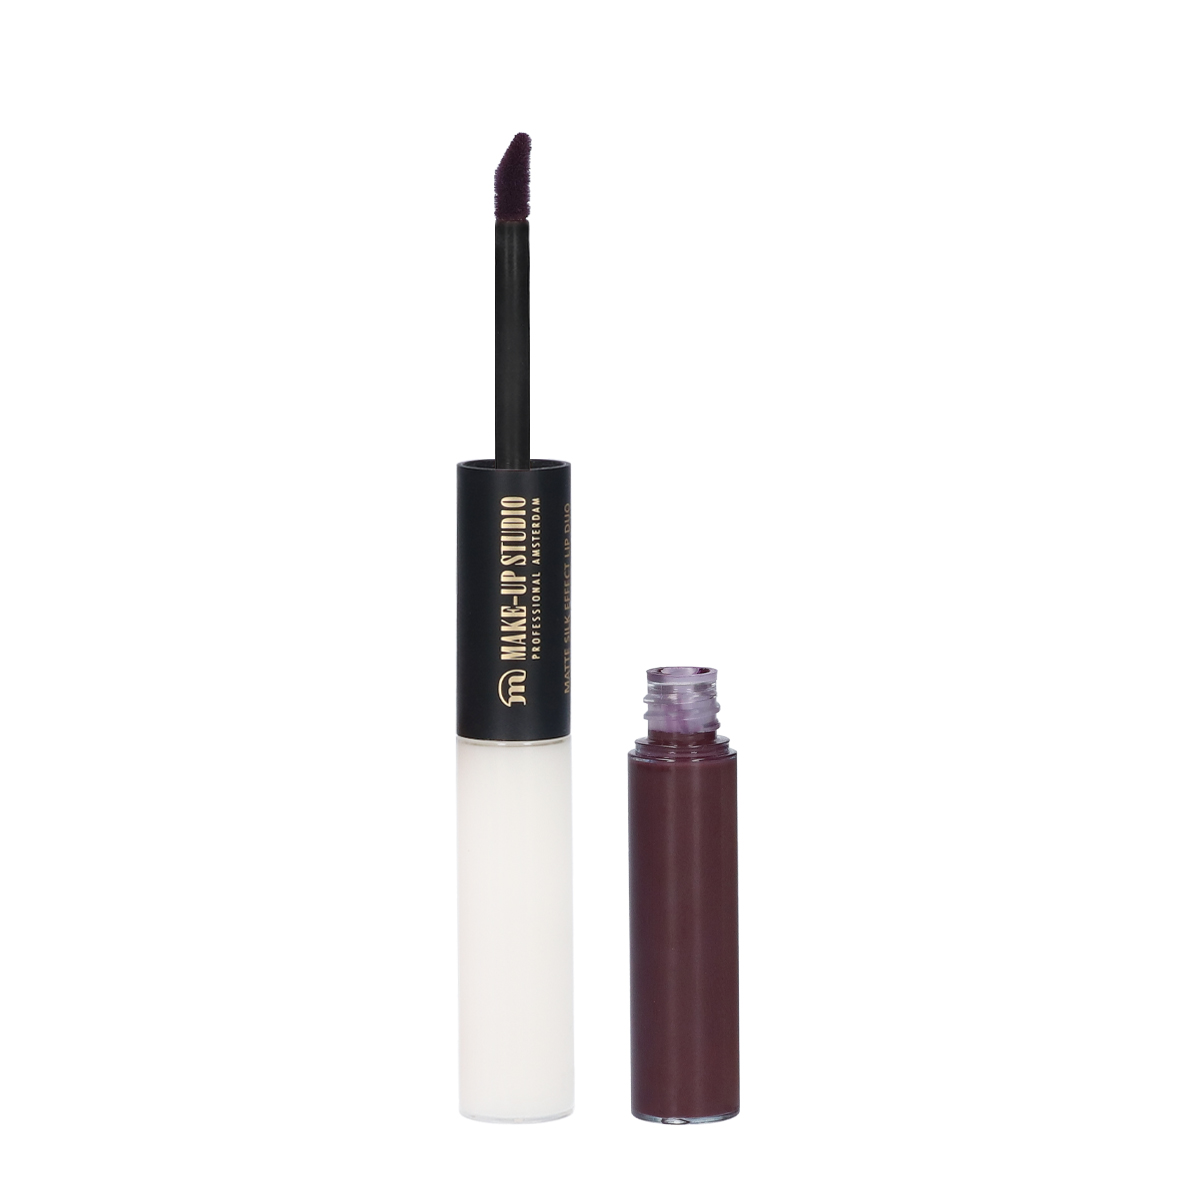 Shop all online! Studio Make-up Studio from Amsterdam | lip products Make-up